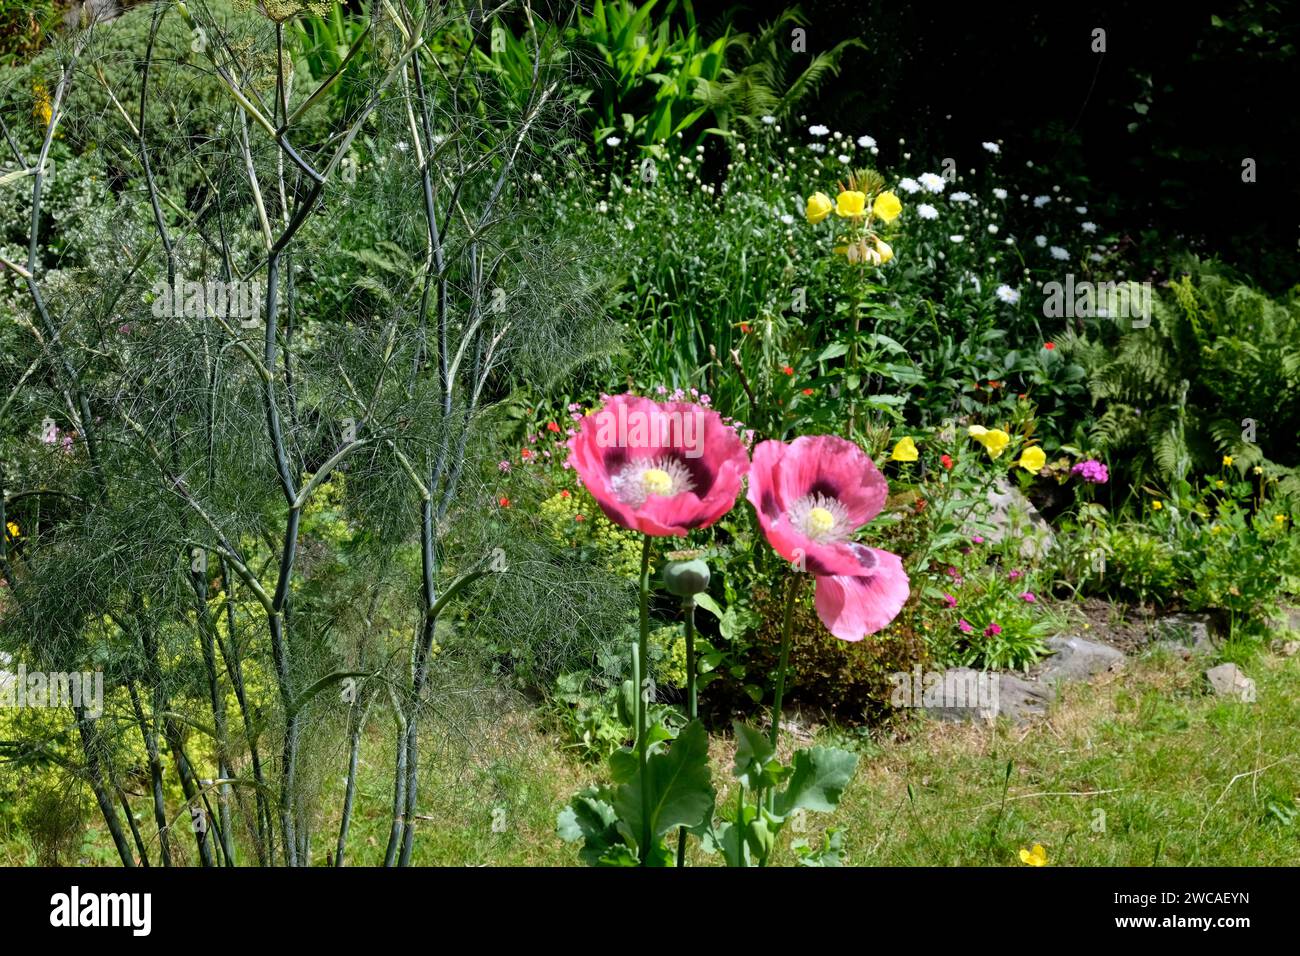 Pink poppies growing next to fennell plant in small backyard flower garden flowers blooming in July Carmarthenshire Wales UK Great BritainKATHY DEWITT Stock Photo